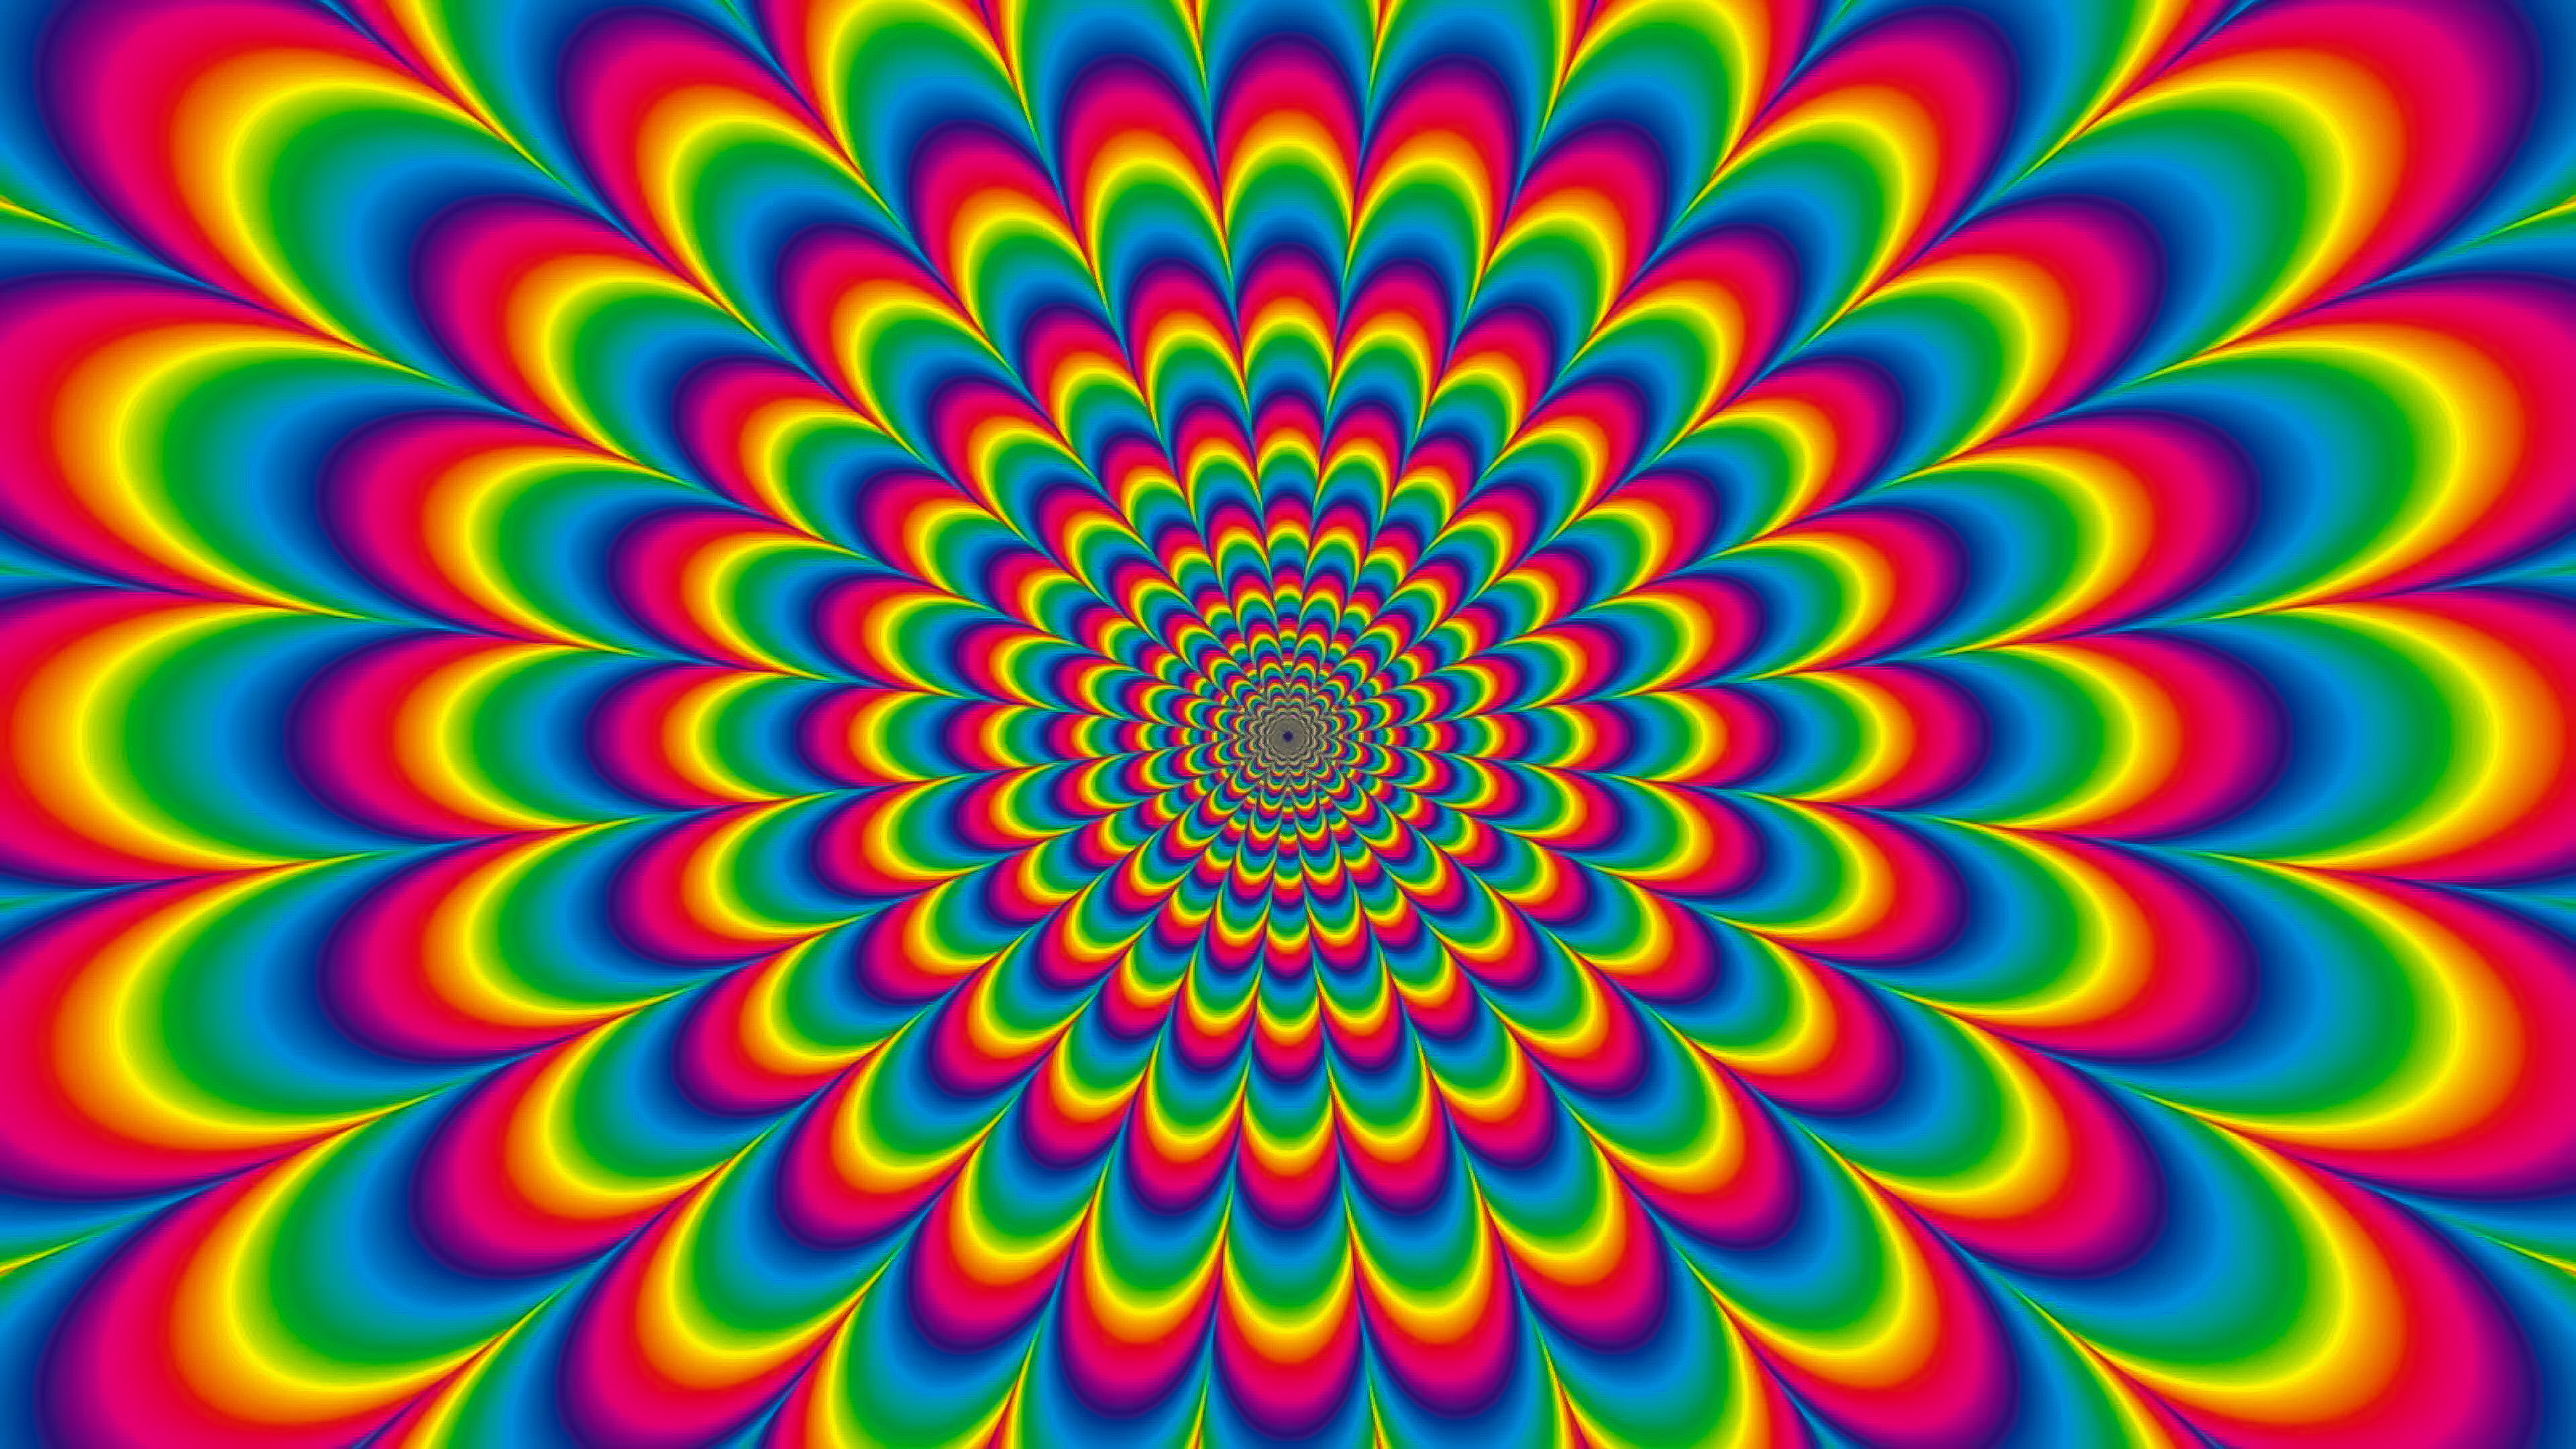 Optical illusion 4k ultra hd 16:10 wallpapers hd, desktop backgrounds  3840x2400, images and pictures